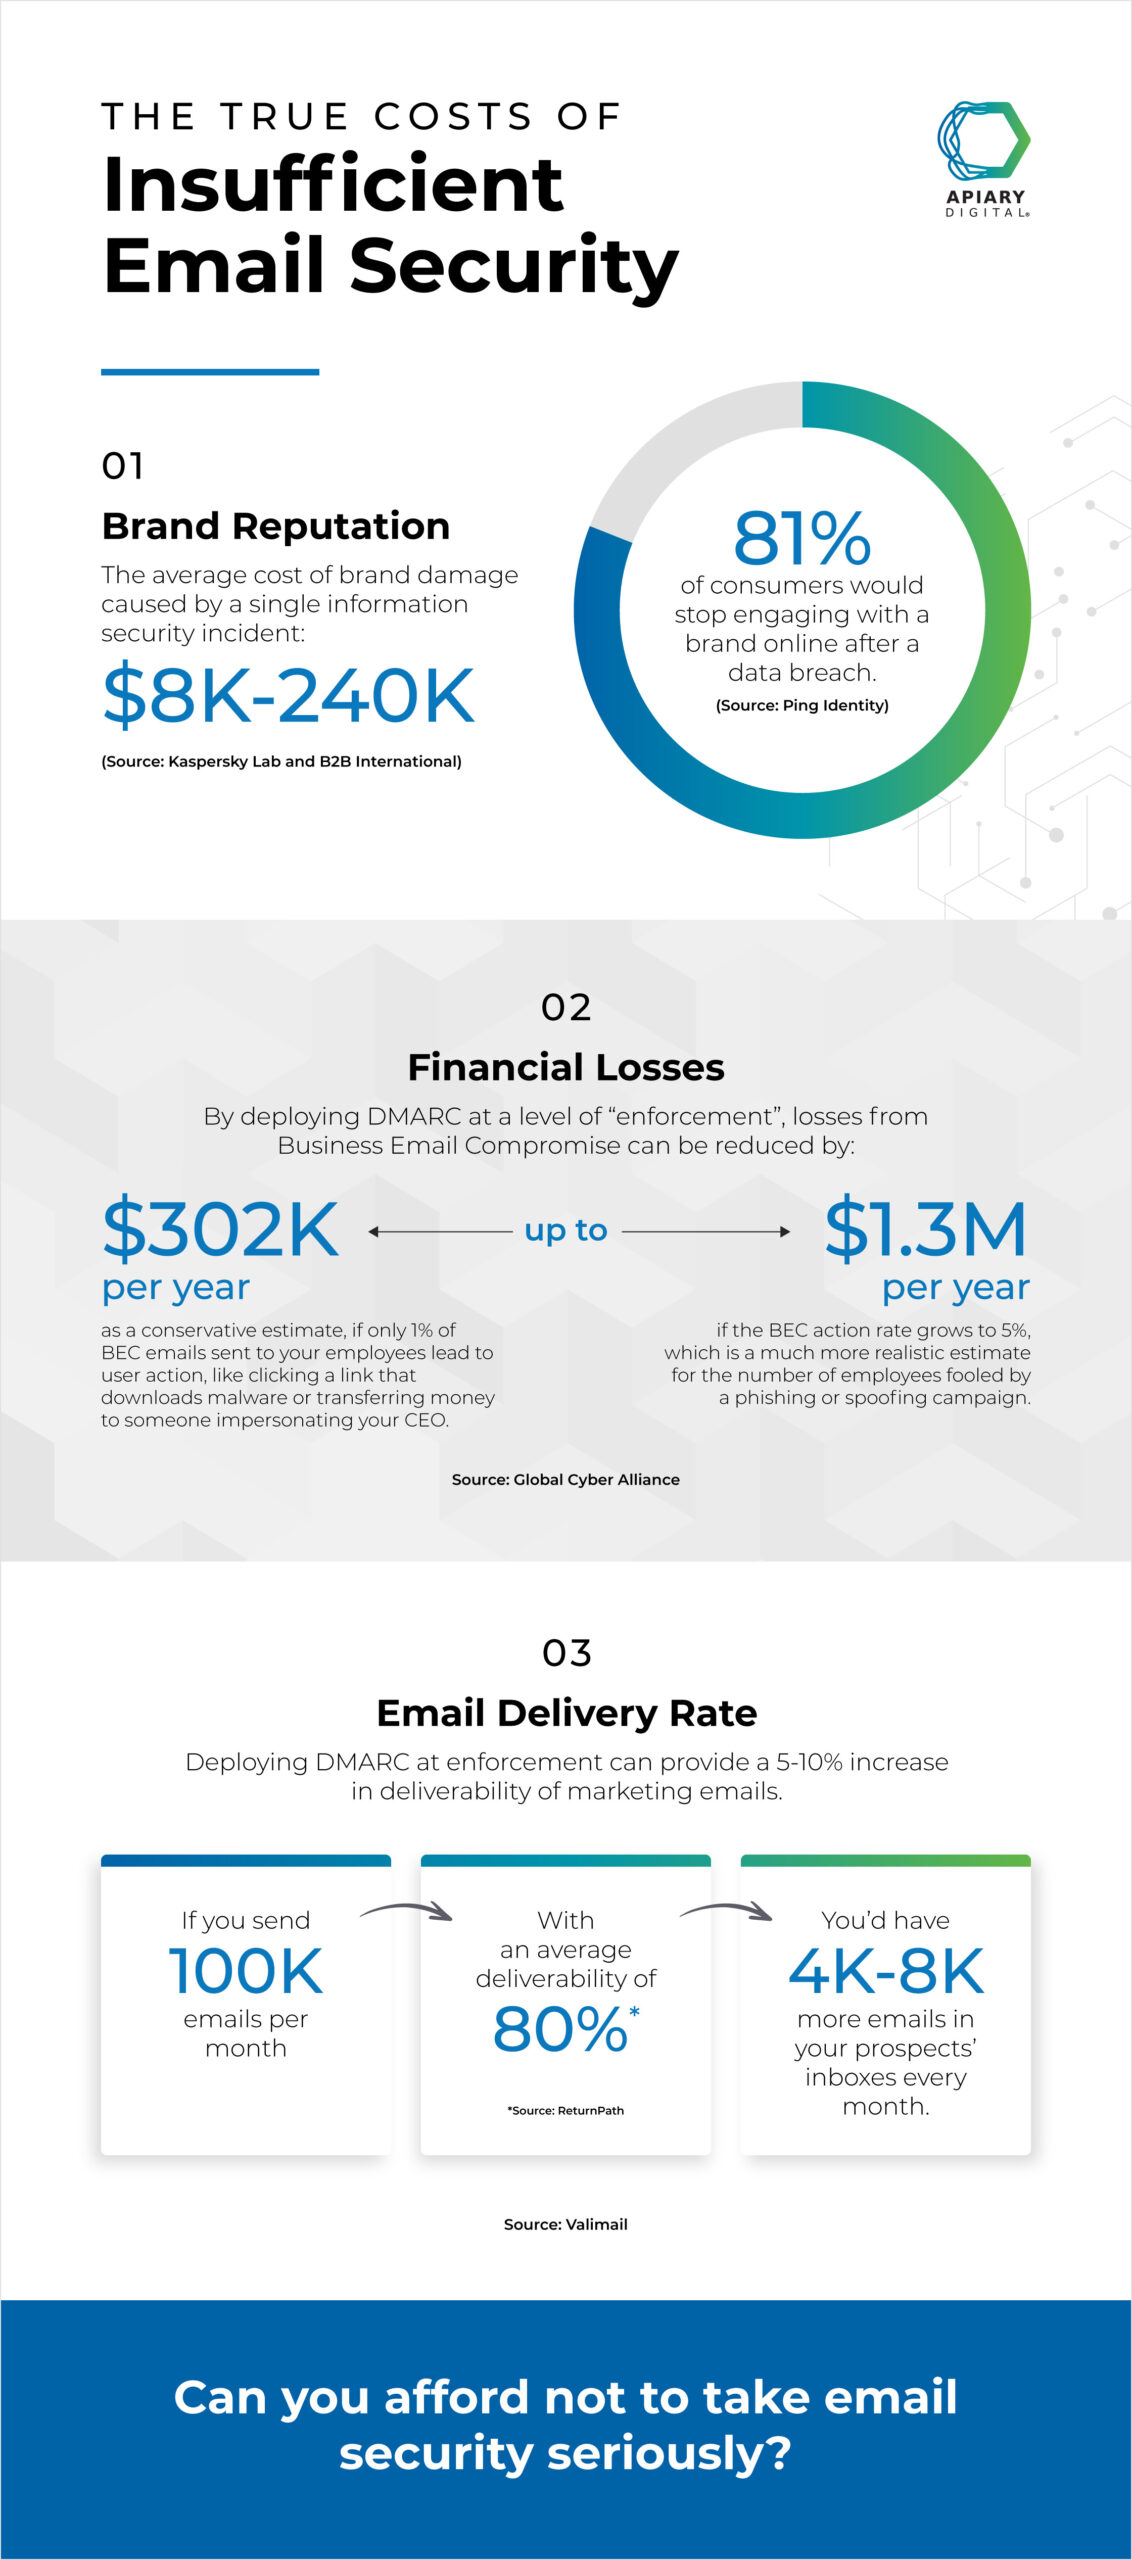 The True Costs of Insufficient Email Security